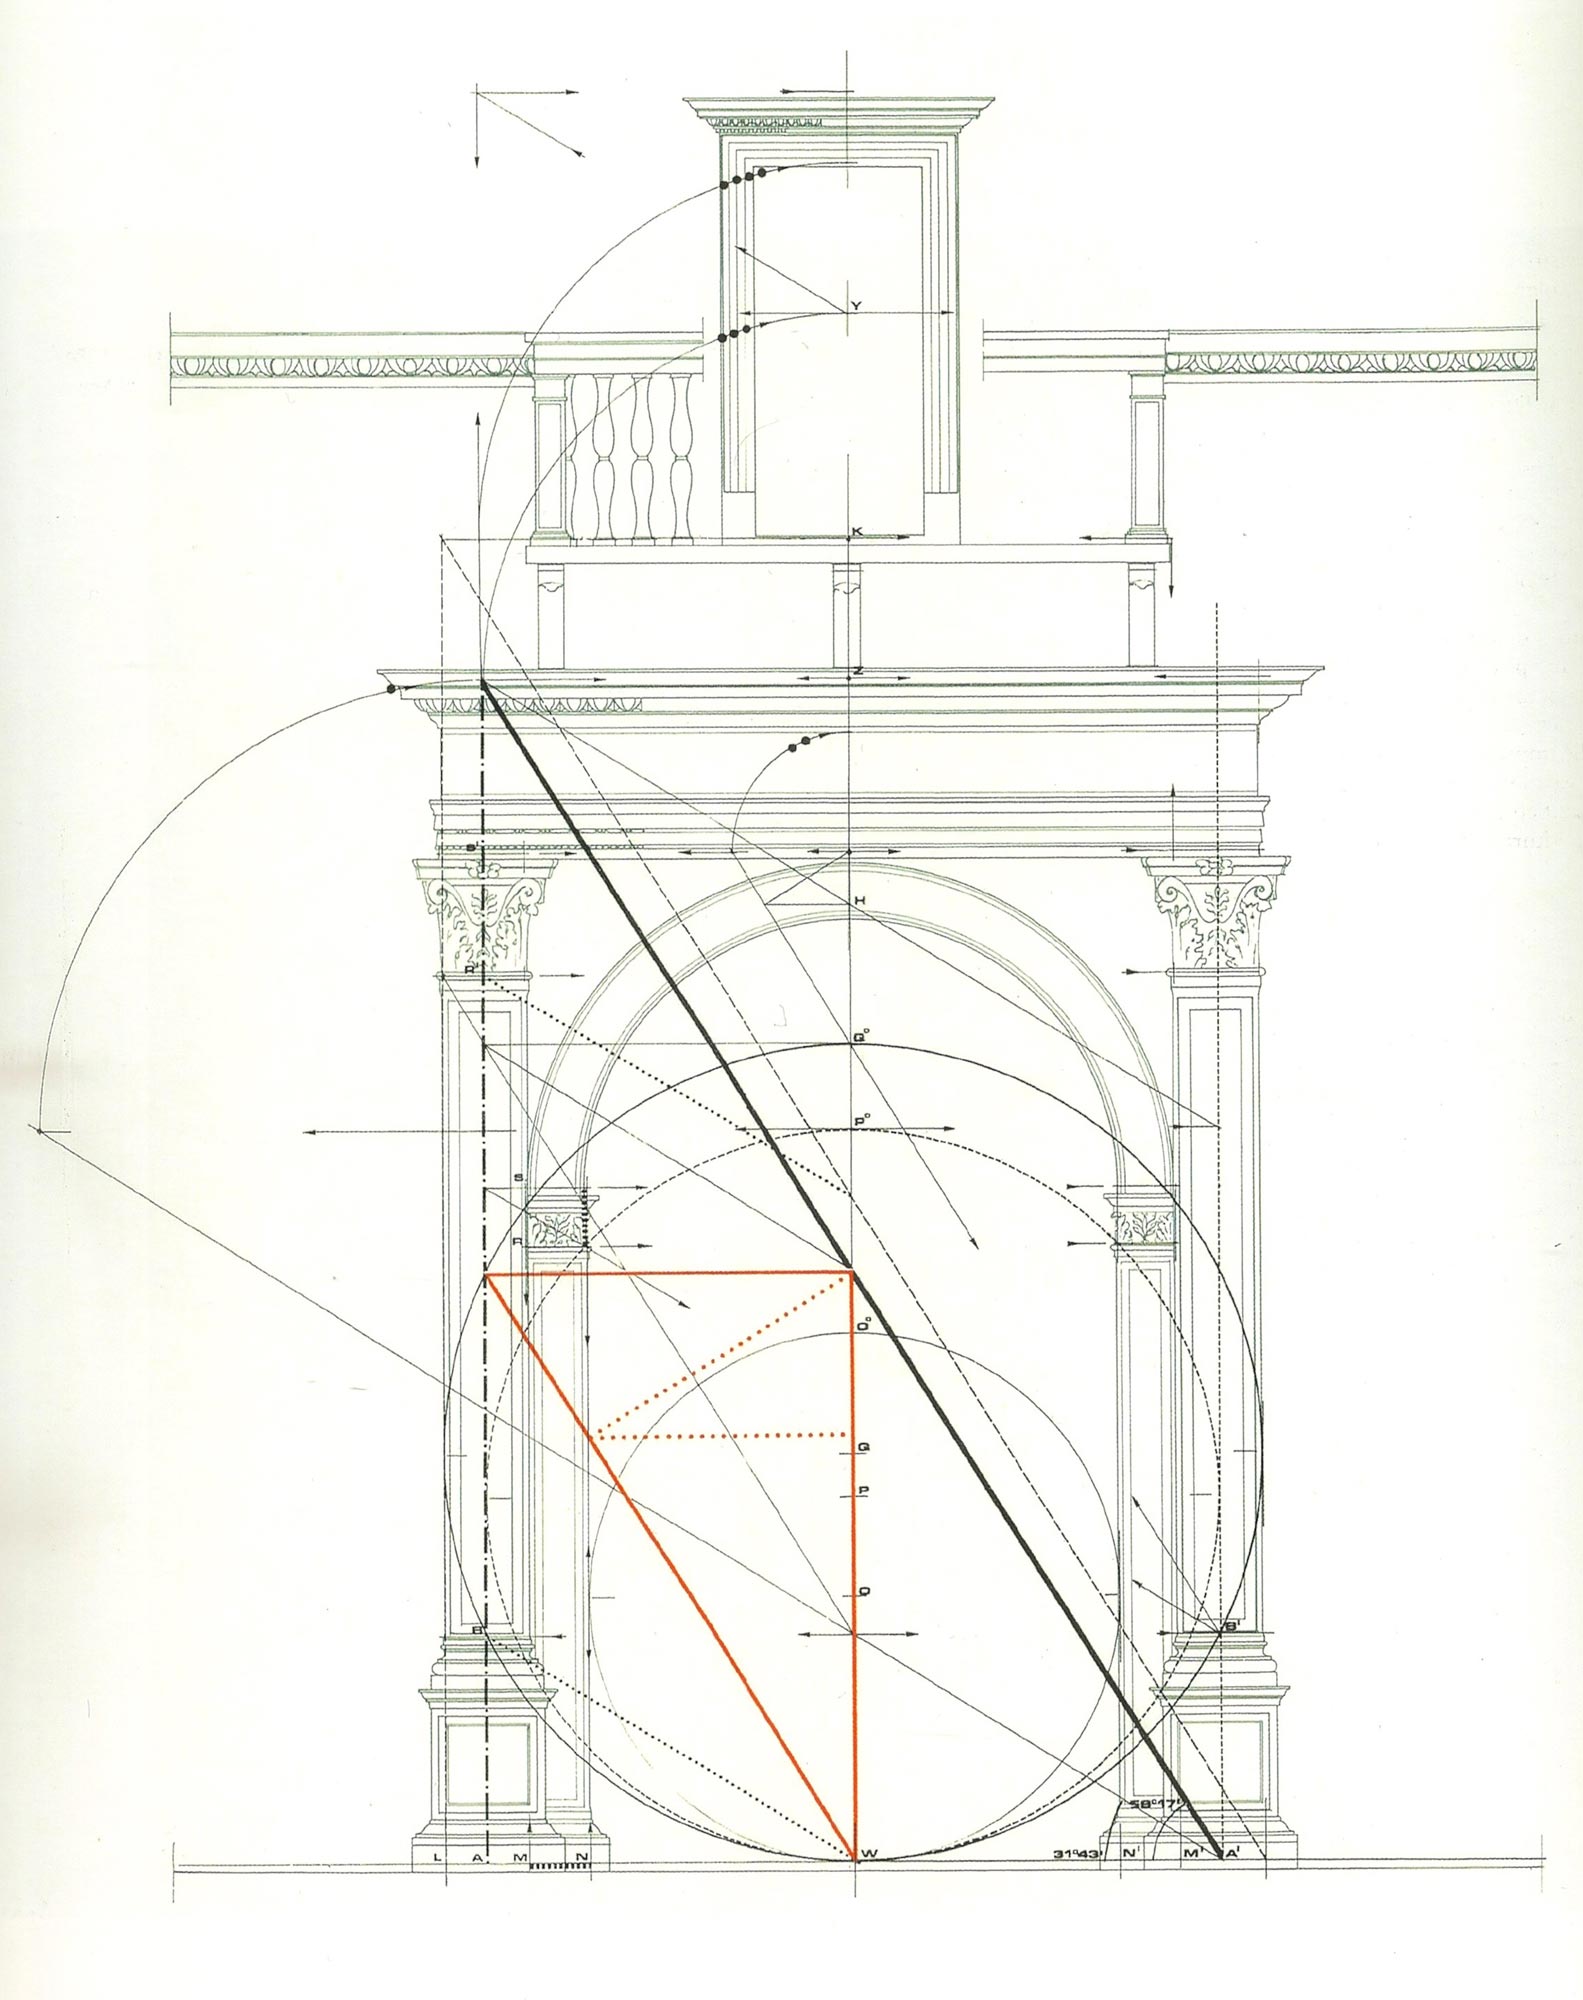 The proportions of the Portal. Survey by architect Franca Manenti Valli.